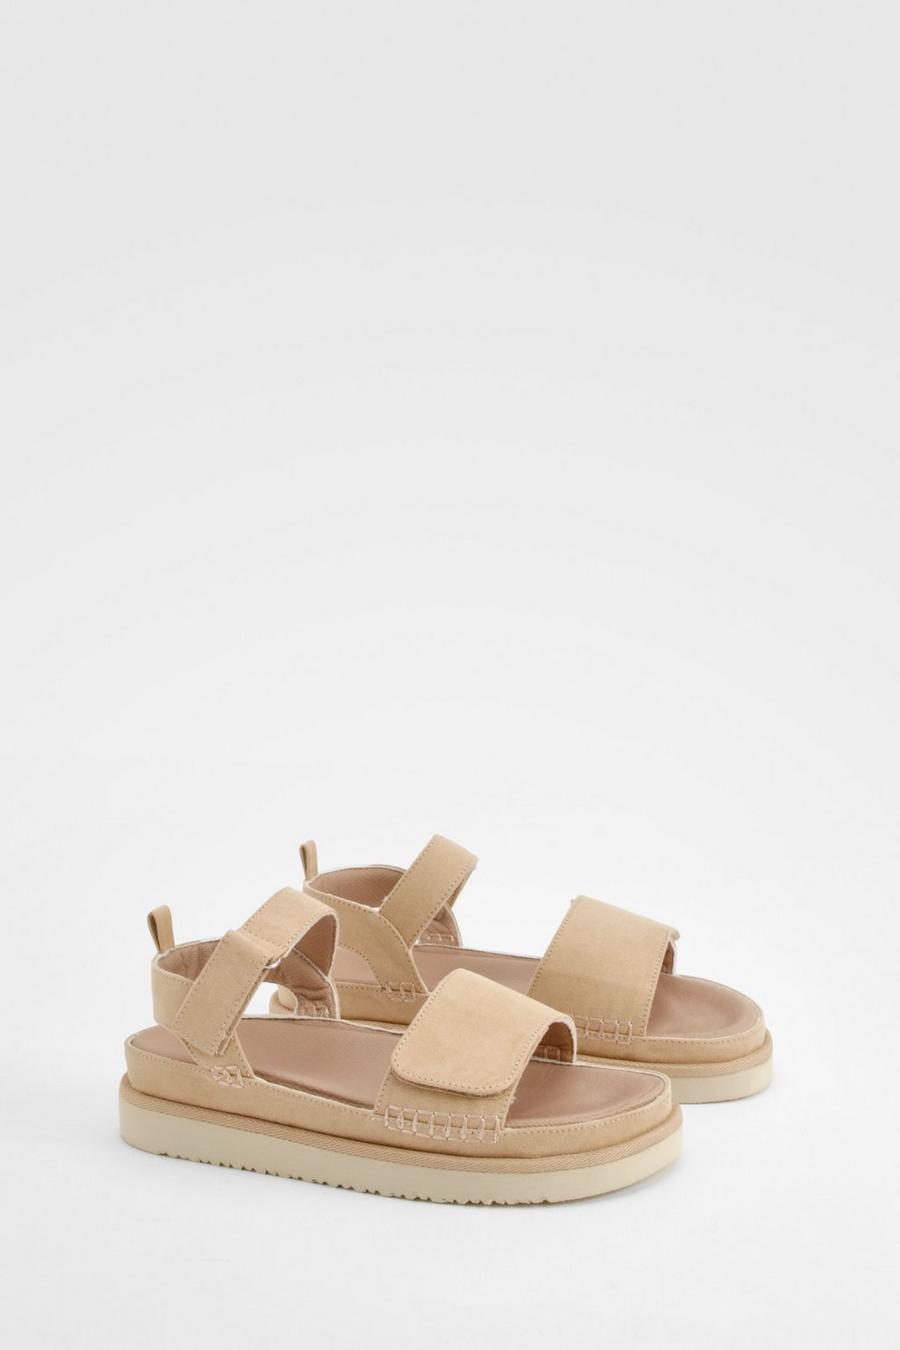 Sand Casual 2 Part Chunky Sandals